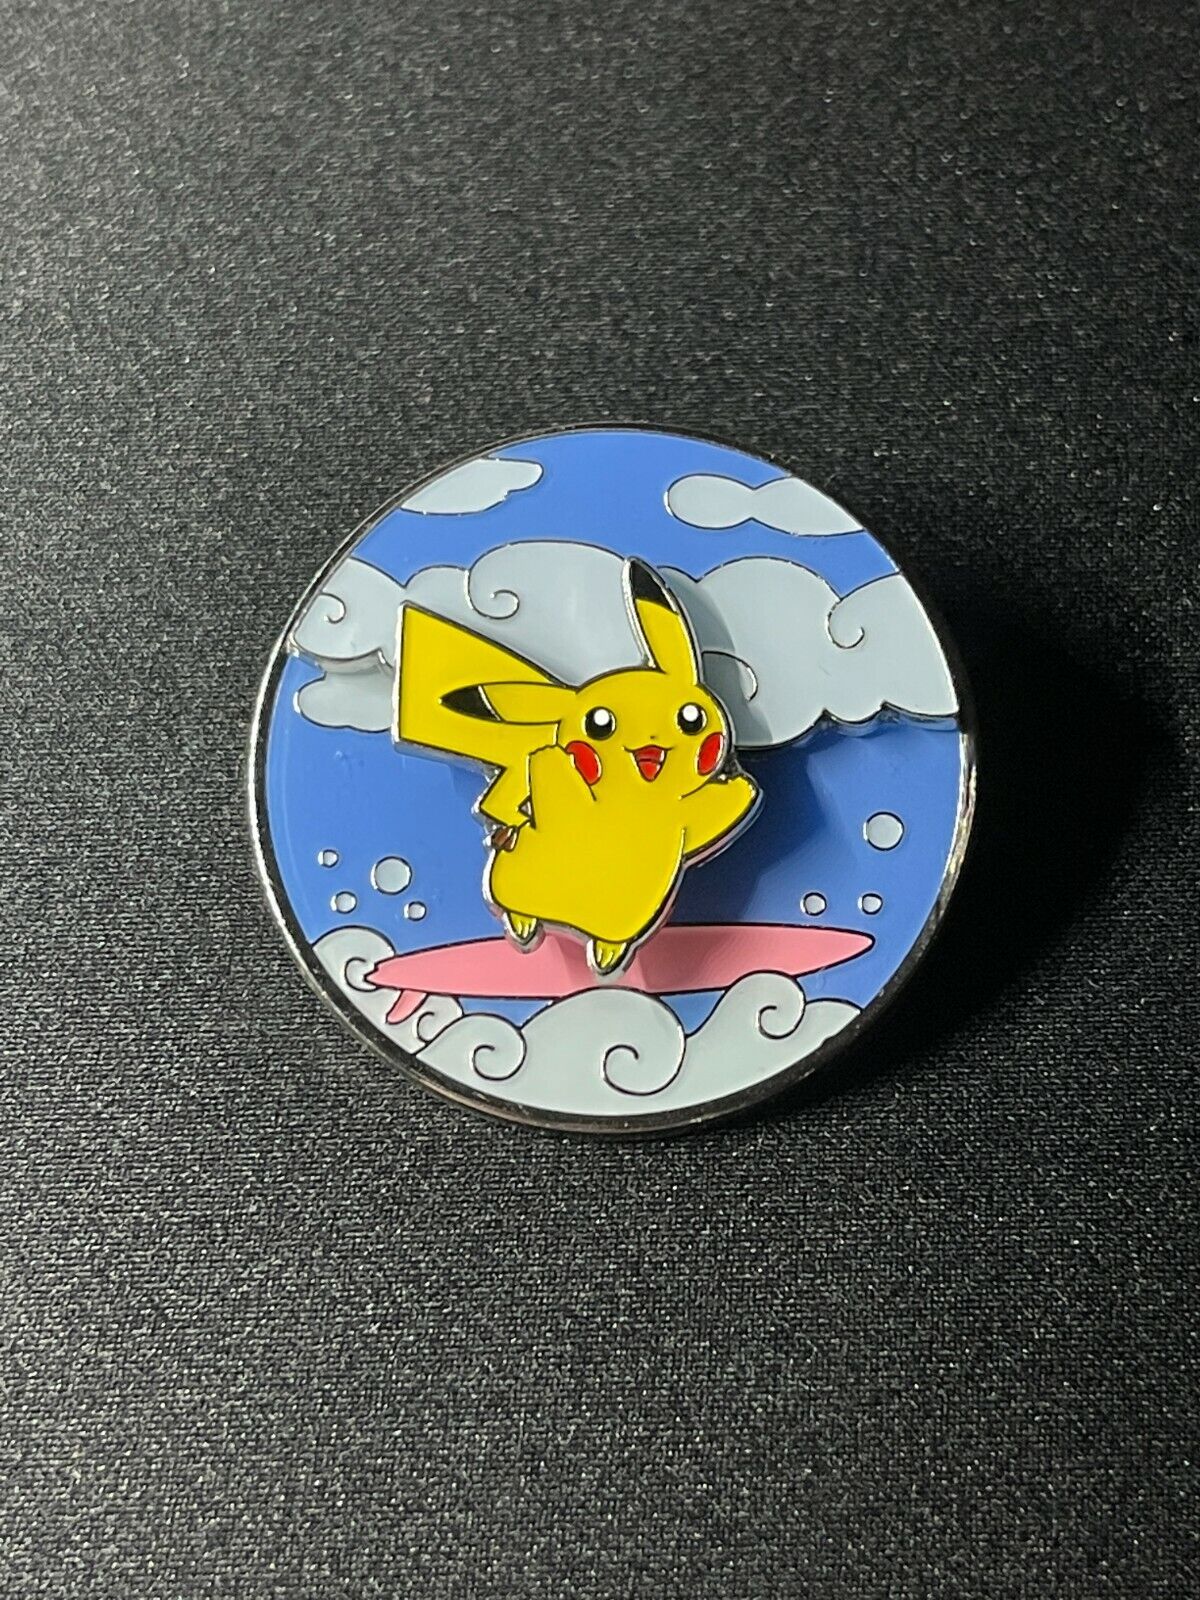 Pokemon Pikachu Pin Flying & Surfing Celebrations 25th Anniversary Official